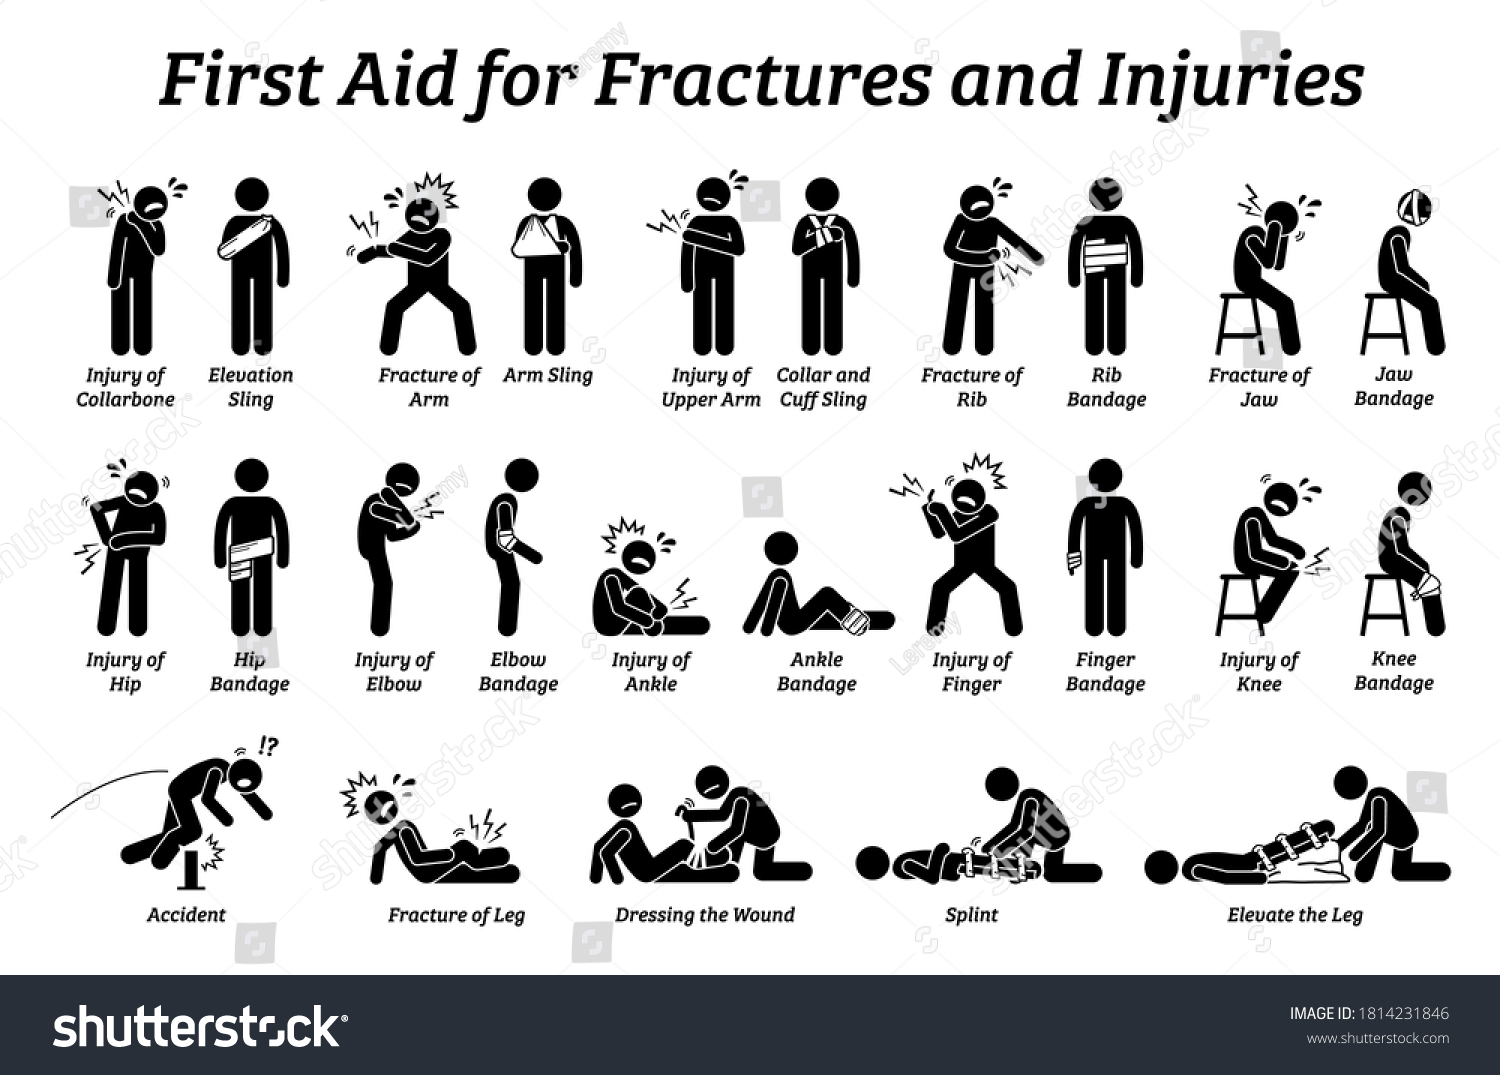 SVG of First aid for fractures and injuries on different body parts stick figure icons. Vector illustrations of sling, bandage, and elevation techniques treatment for broken bones and pain. svg